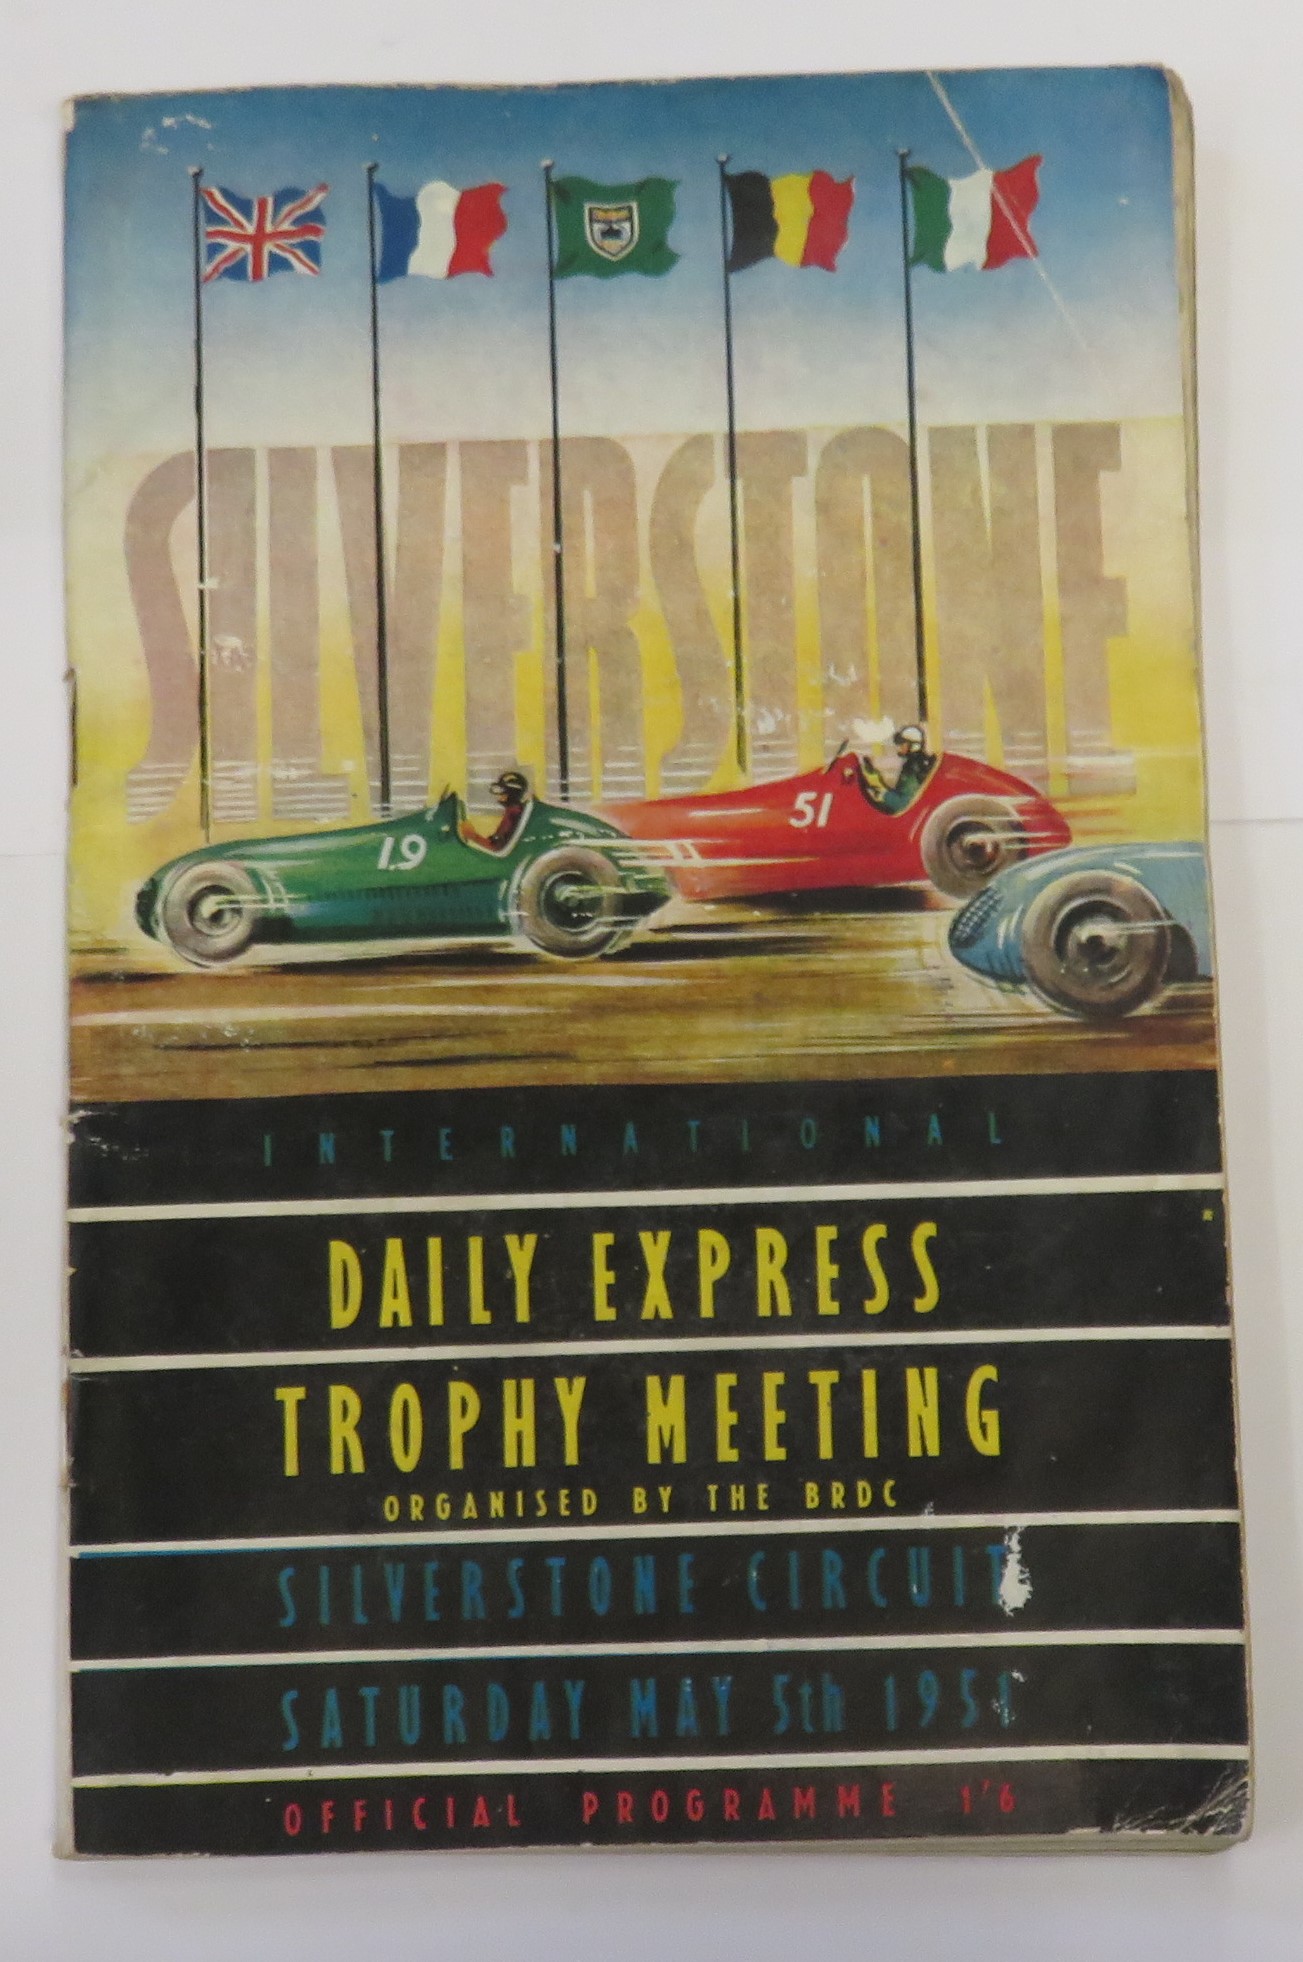 International Daily Express Trophy Meeting Silverstone Circuit Saturday May 5th 1951